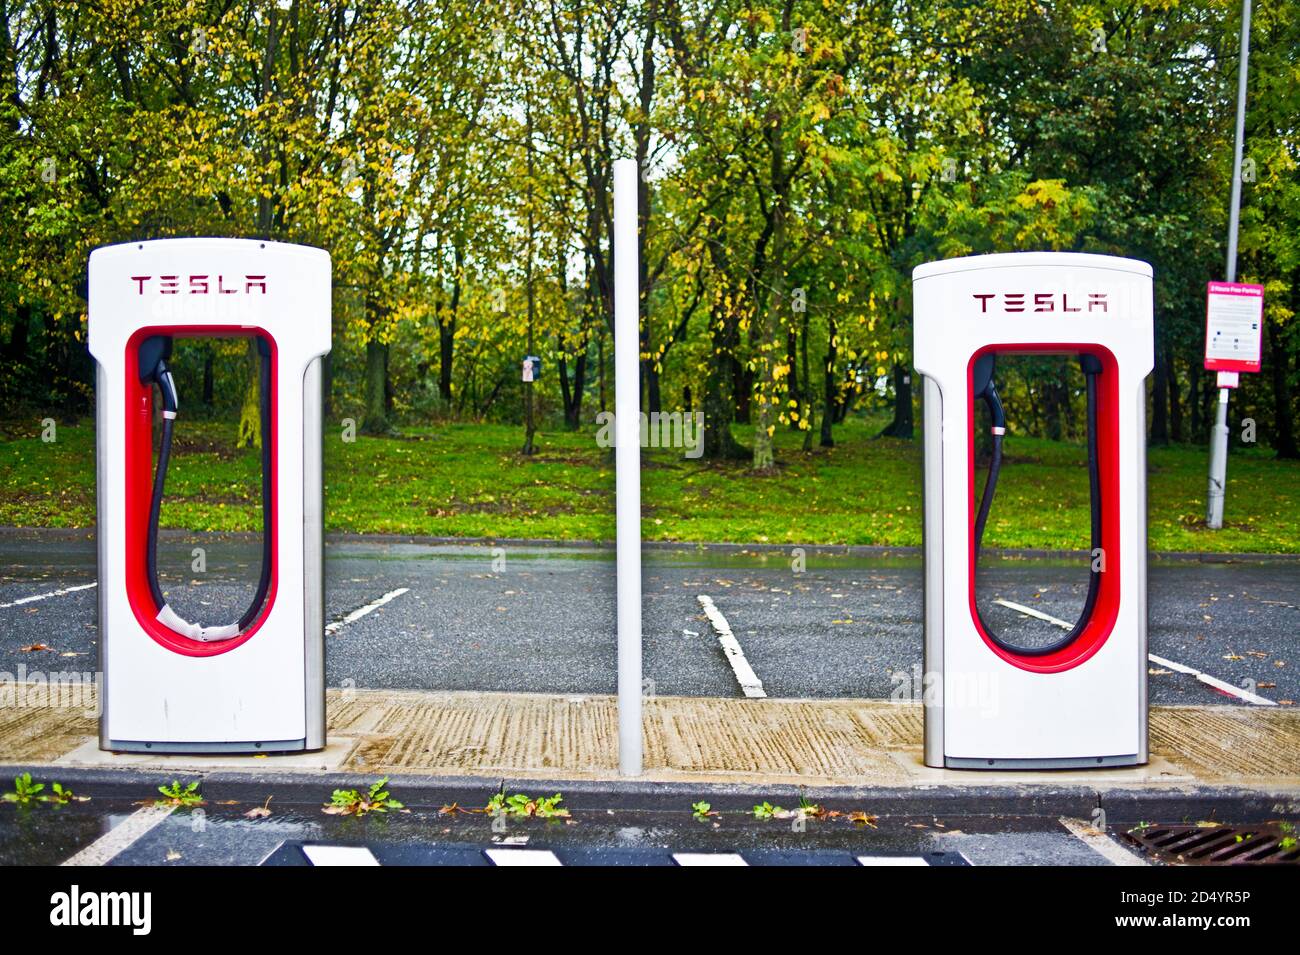 Tesla Electric Car Charging Points Stock Photo